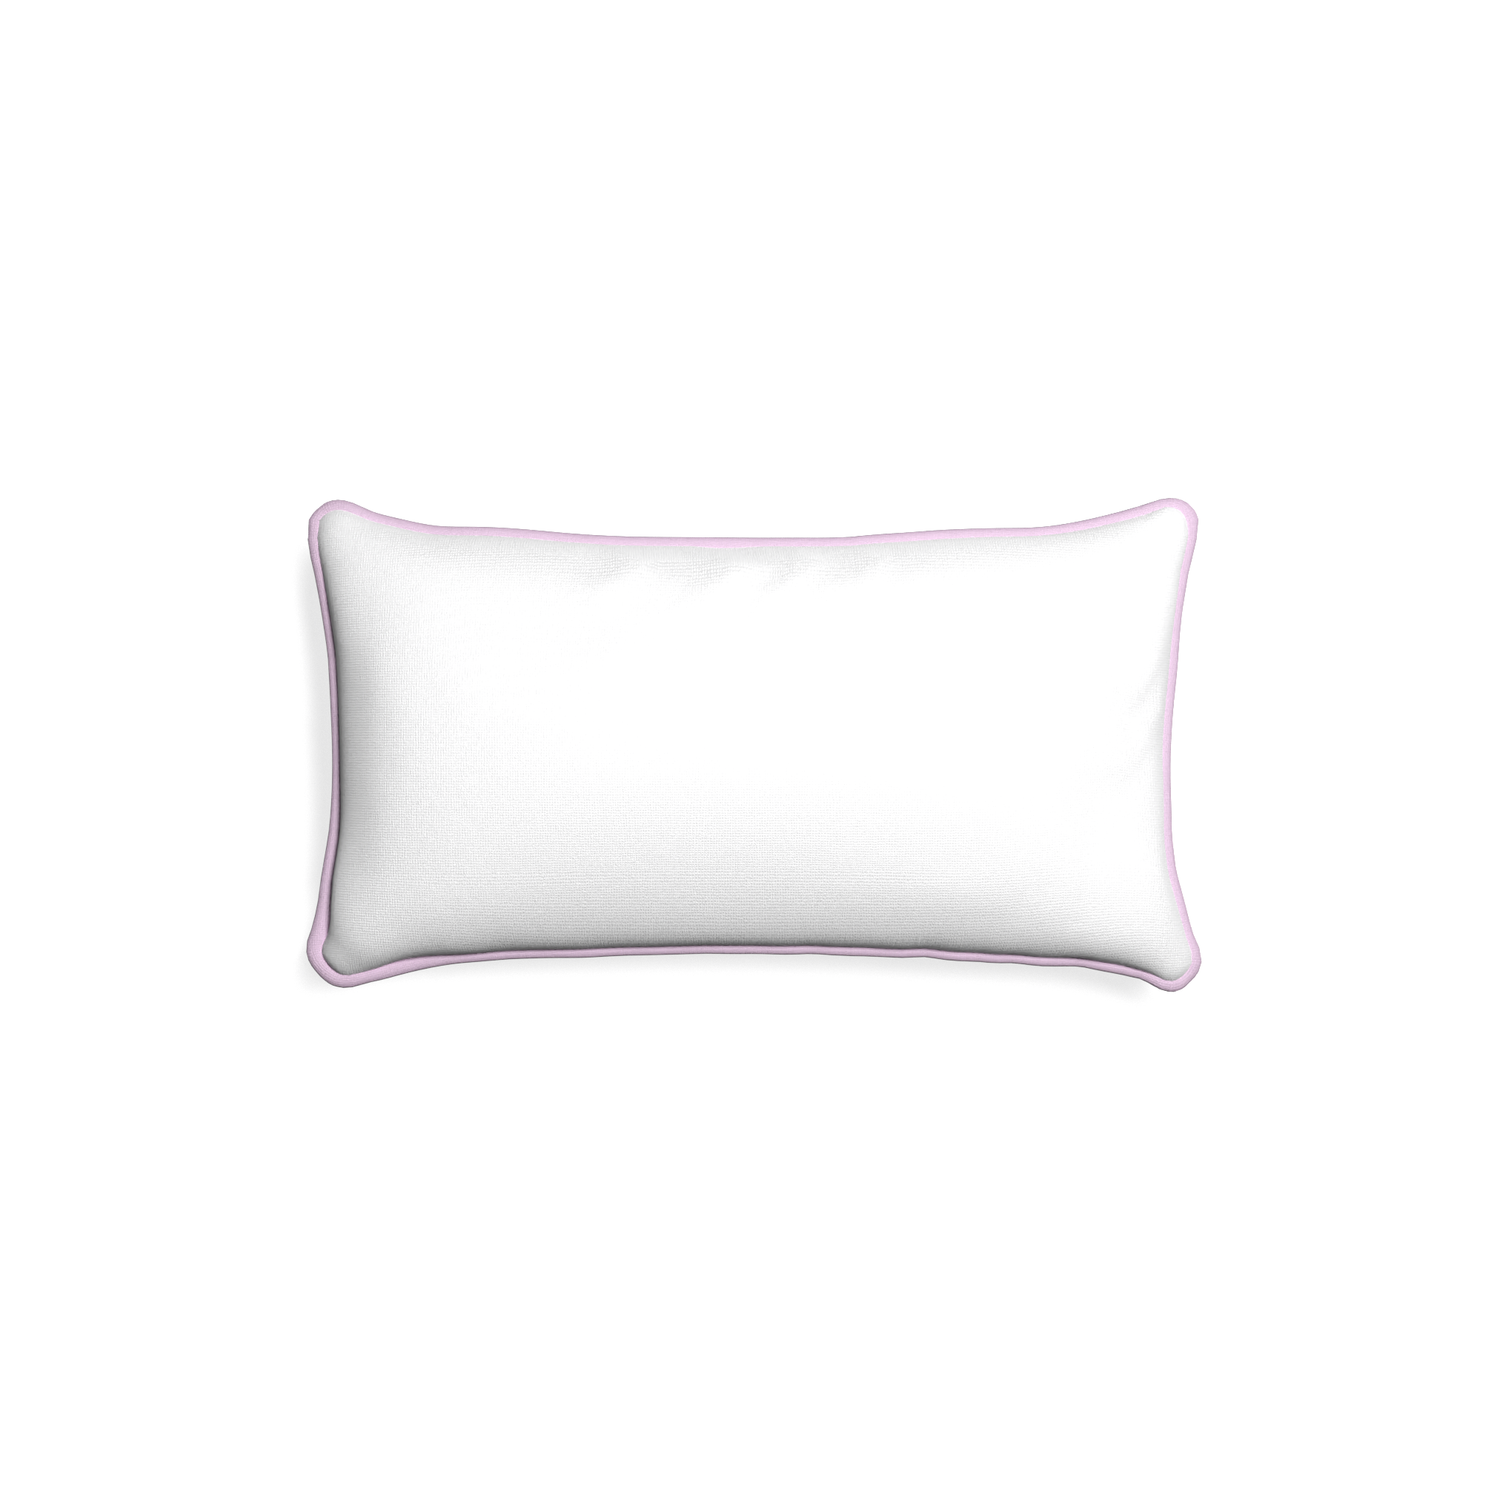 Petite-lumbar snow custom white cottonpillow with l piping on white background